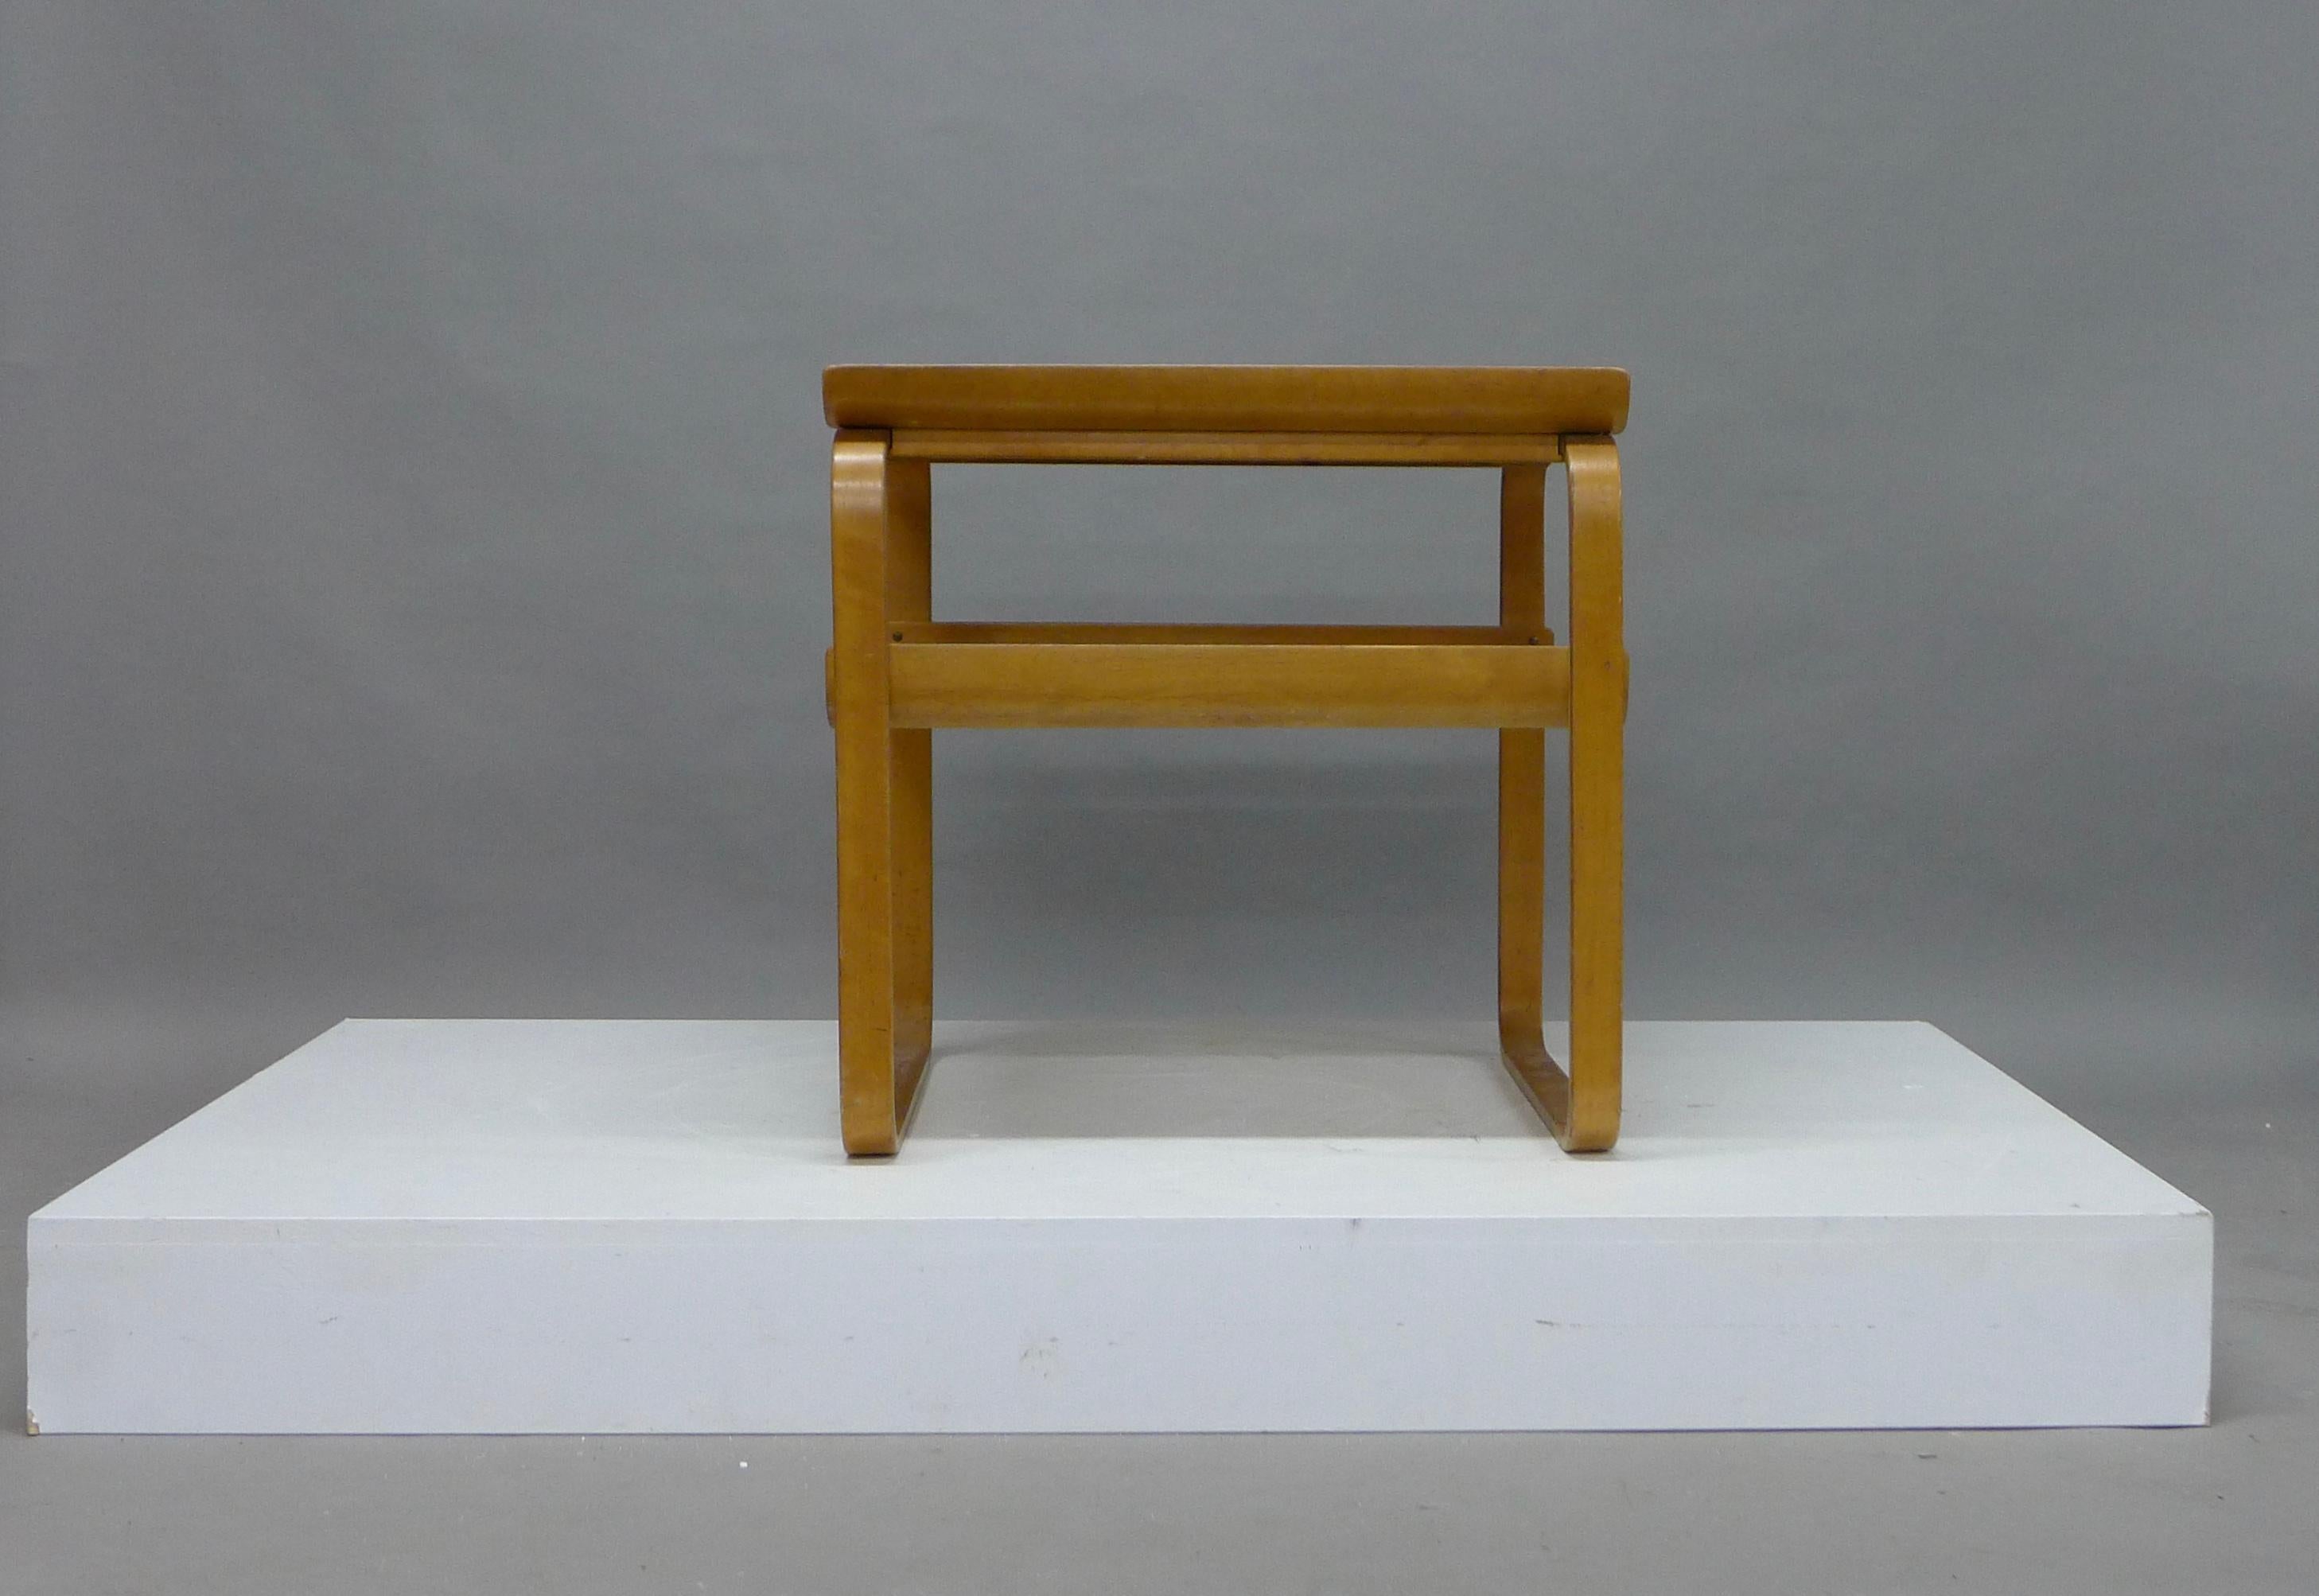 Alvar Aalto , two tiered table , model 915 first designed by Aalto in 1932 as part of the furnishings for the Paimio Sanitorium . Birch ply moulded legs supporting two birch ply shelves , looks to be completely original and likely from the 40's or